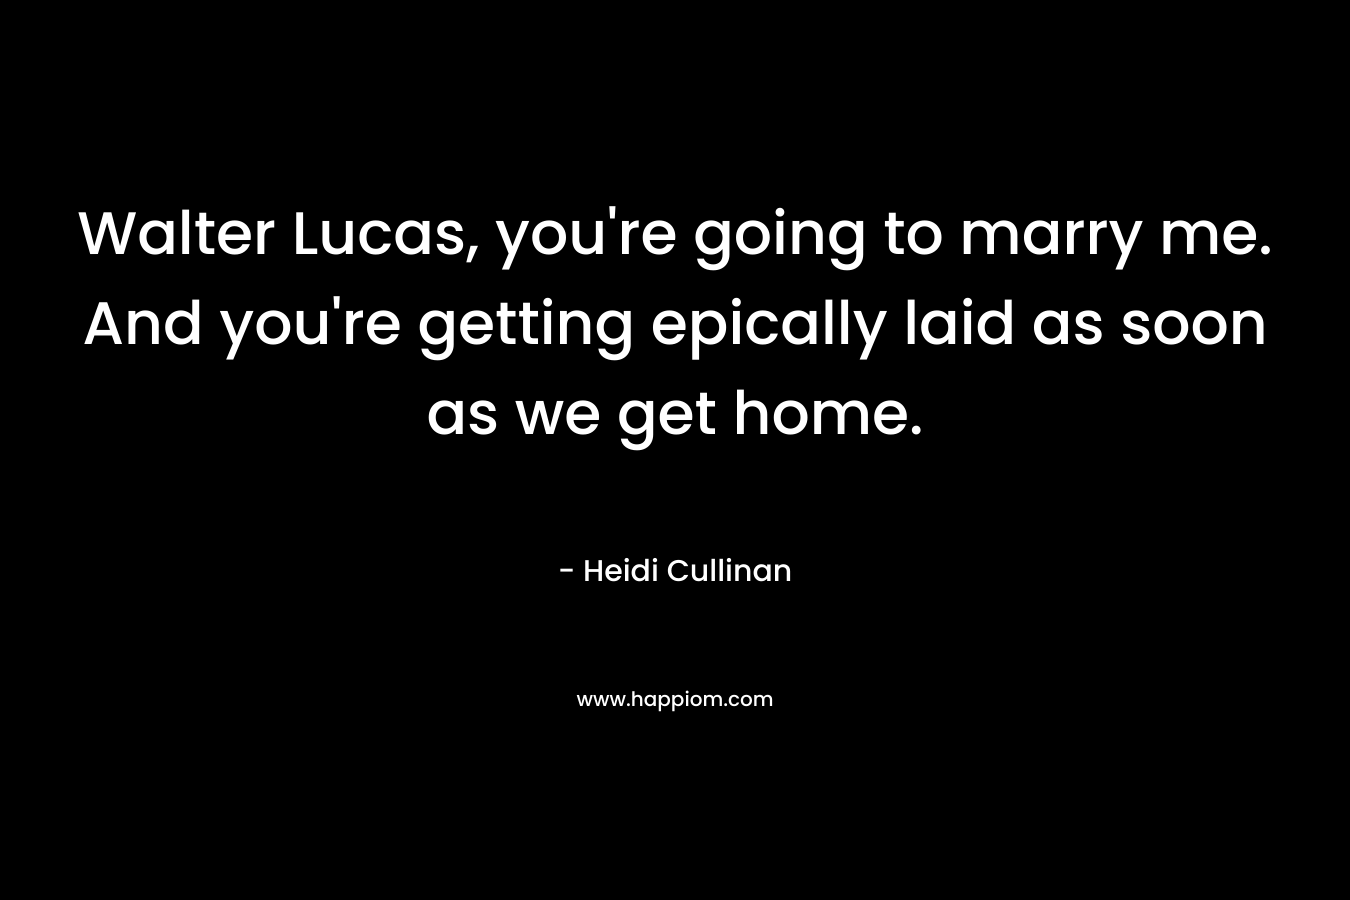 Walter Lucas, you’re going to marry me. And you’re getting epically laid as soon as we get home. – Heidi Cullinan